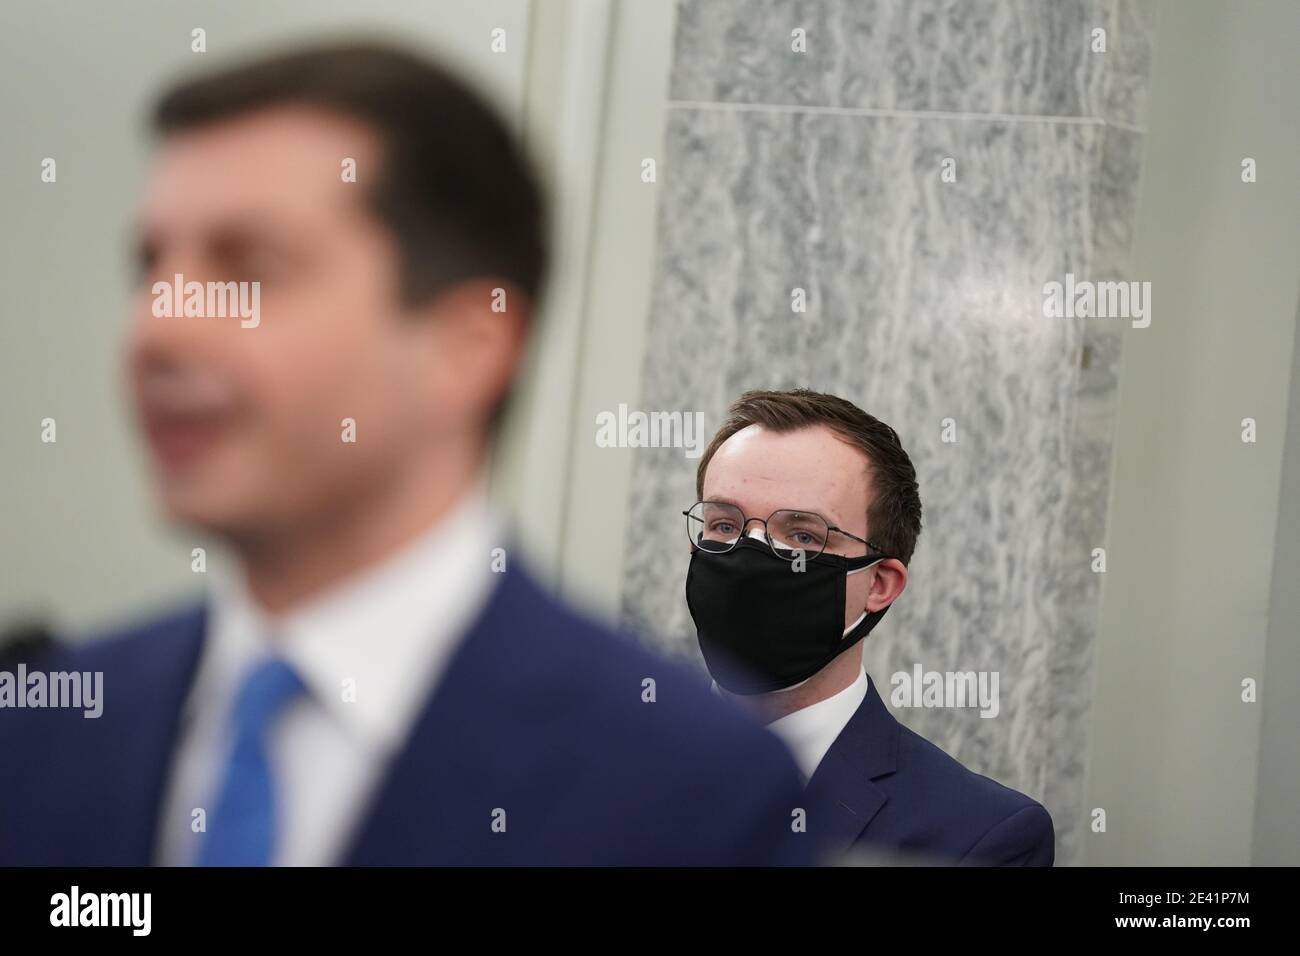 Pete Buttigieg, U.S. secretary of transportation nominee for U.S. President Joe Biden, left, speaks as husband Chasten Buttigieg, right, wears a protective mask while listening during a Senate Commerce, Science and Transportation Committee confirmation hearing in Washington, DC, U.S., on Thursday, Jan. 21, 2021. Buttigieg, is pledging to carry out the administration's ambitious agenda to rebuild the nation's infrastructure, calling it a 'generational opportunity' to create new jobs, fight economic inequality and stem climate change. Credit: Stefani Reynolds/Pool via CNP Credit: Ken Cedeno Stock Photo